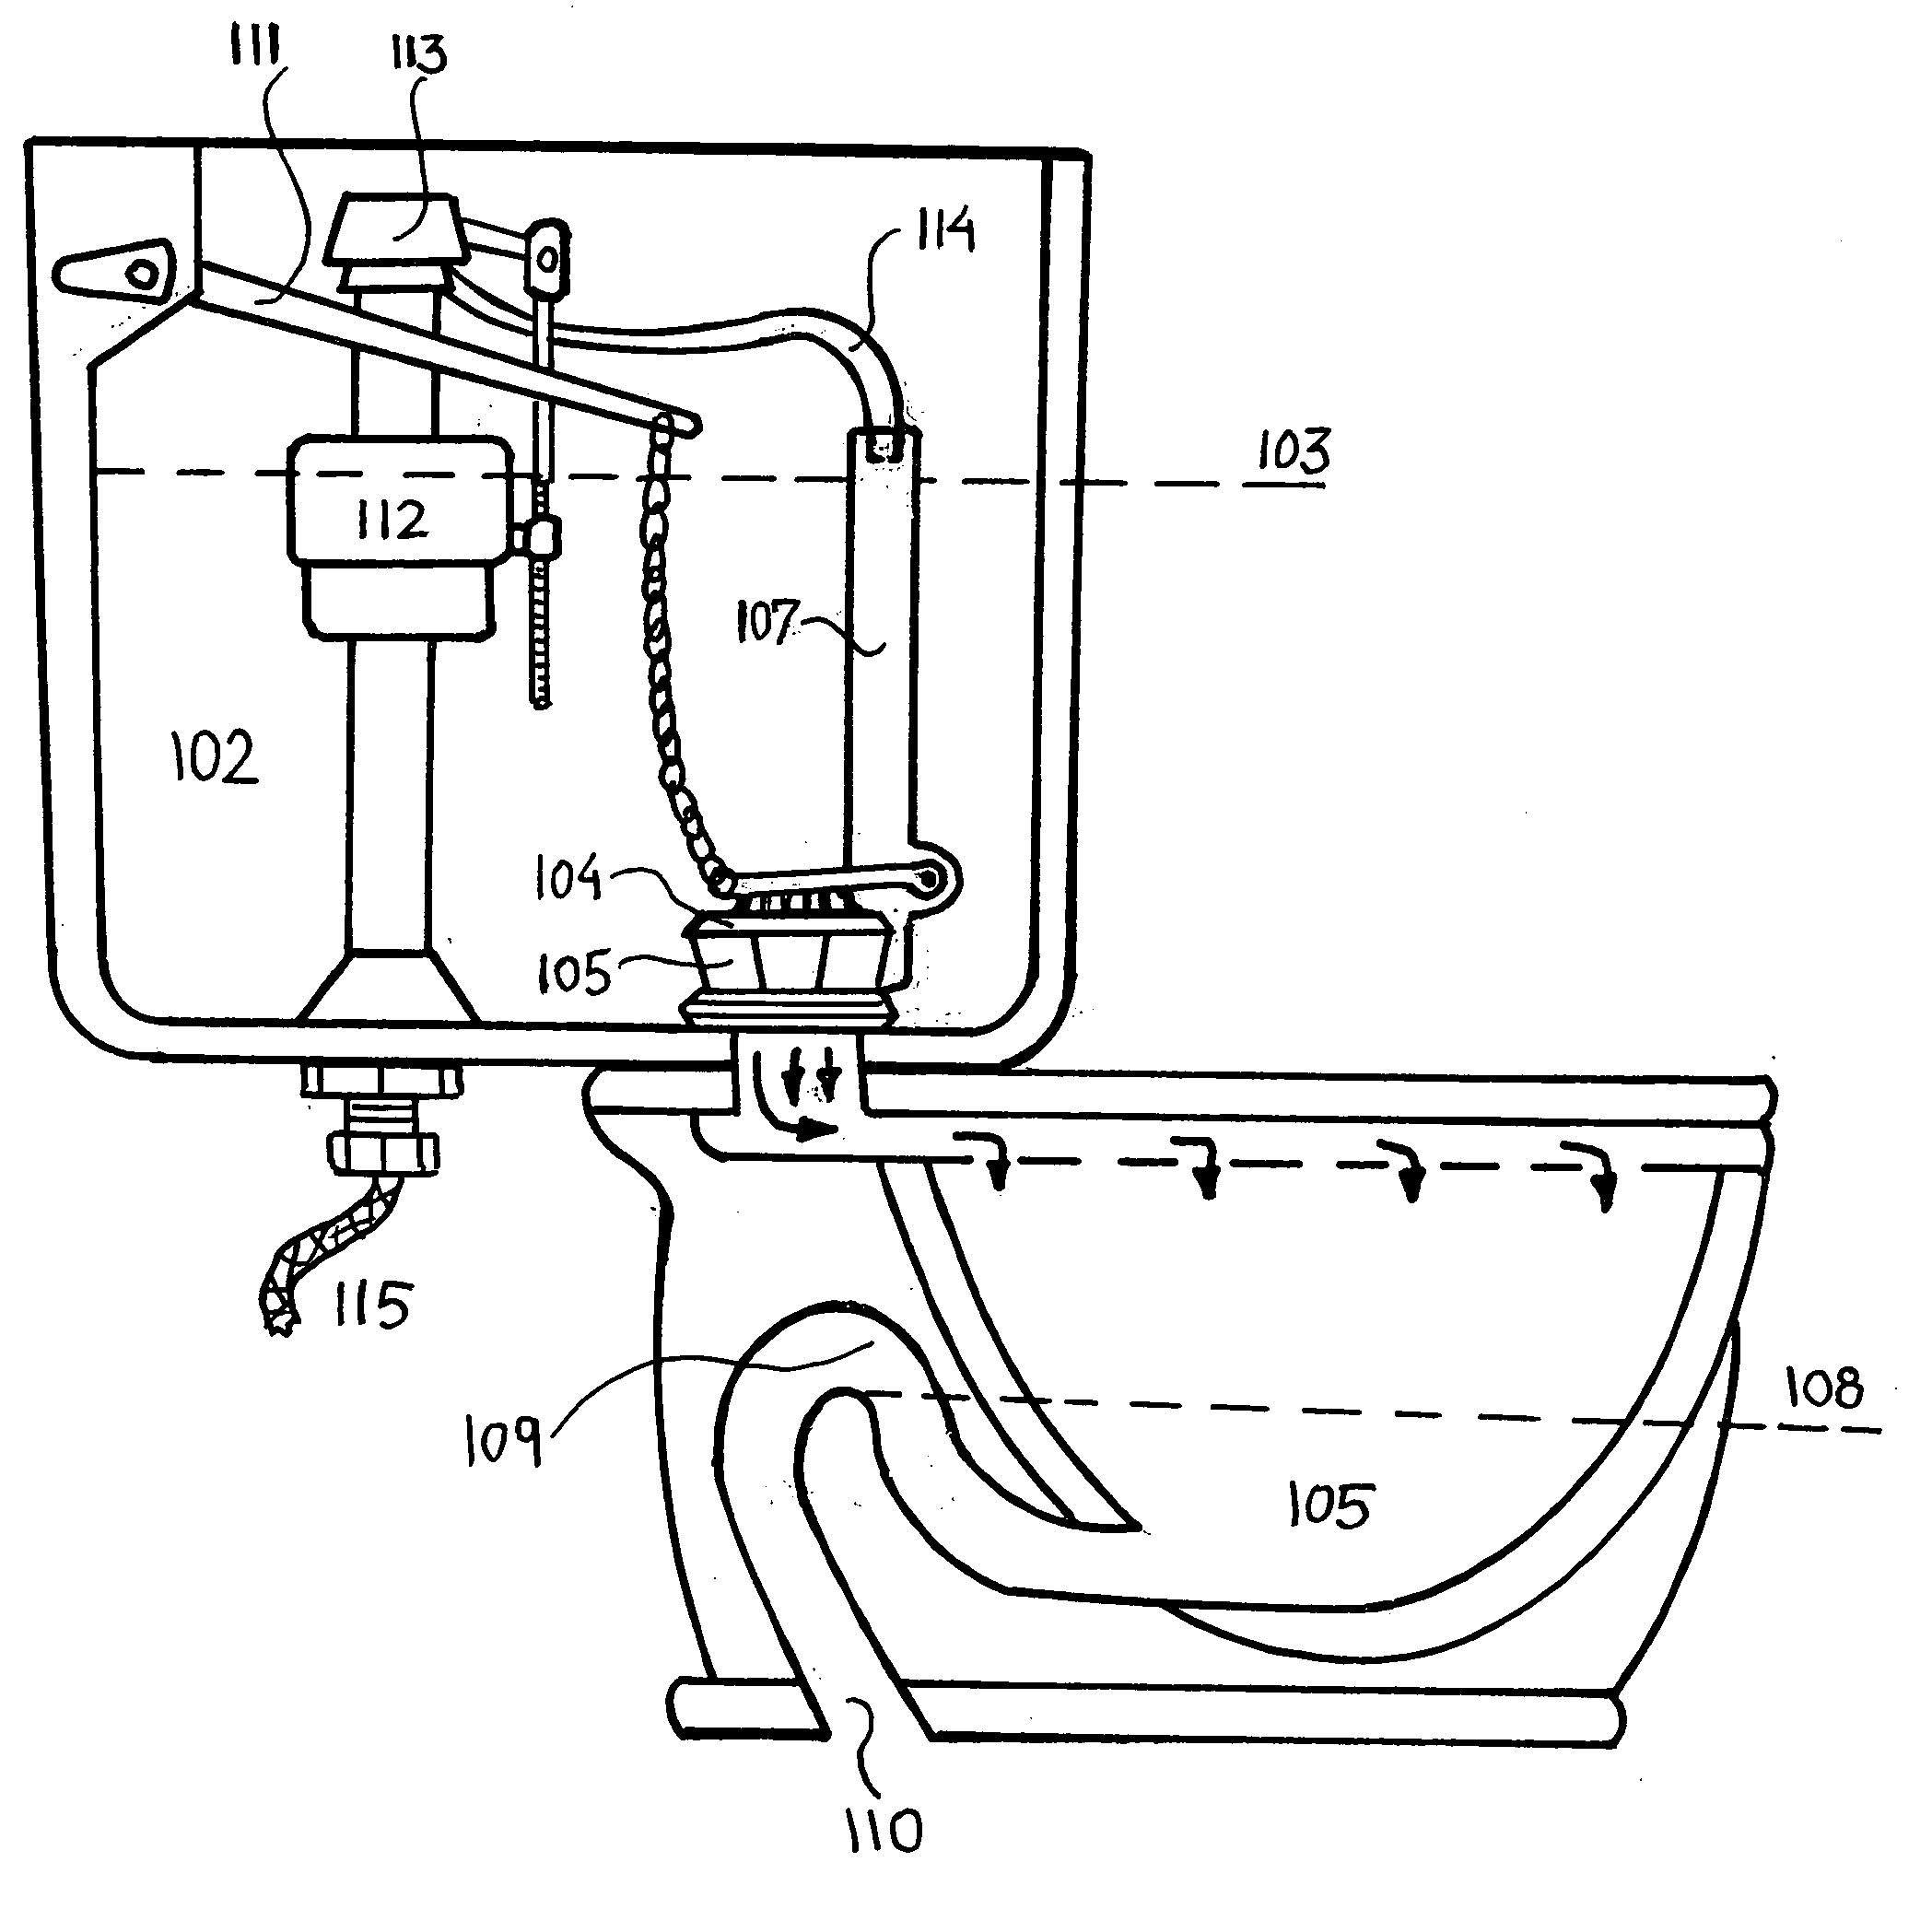 Apparatus and method to control and adjust water consumption by a toilet during refill of the bowl and reservior